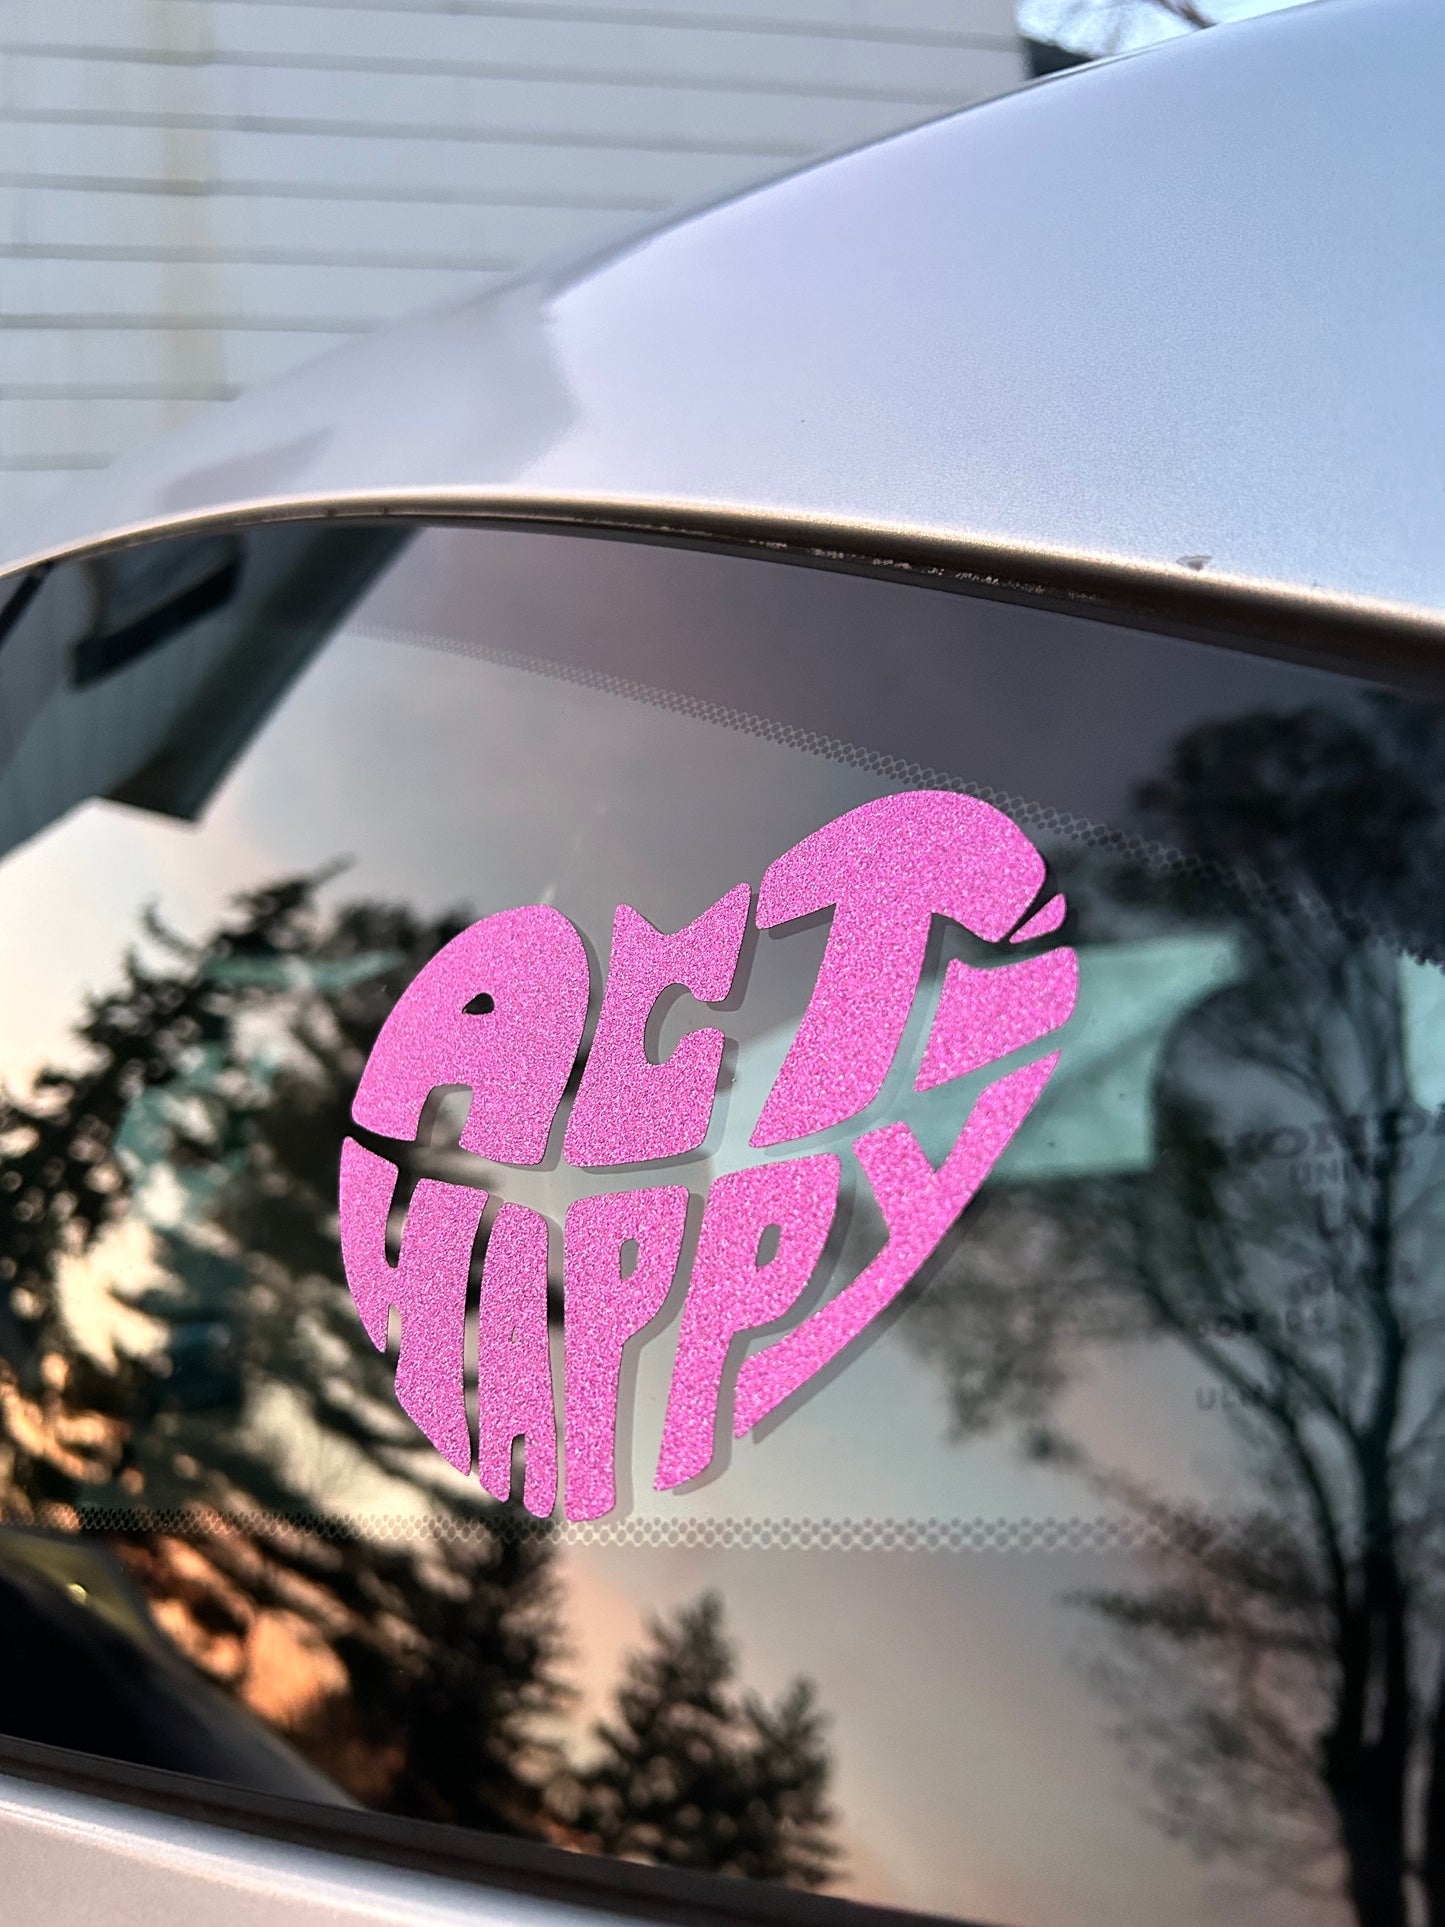 ActHappy Heart Decal